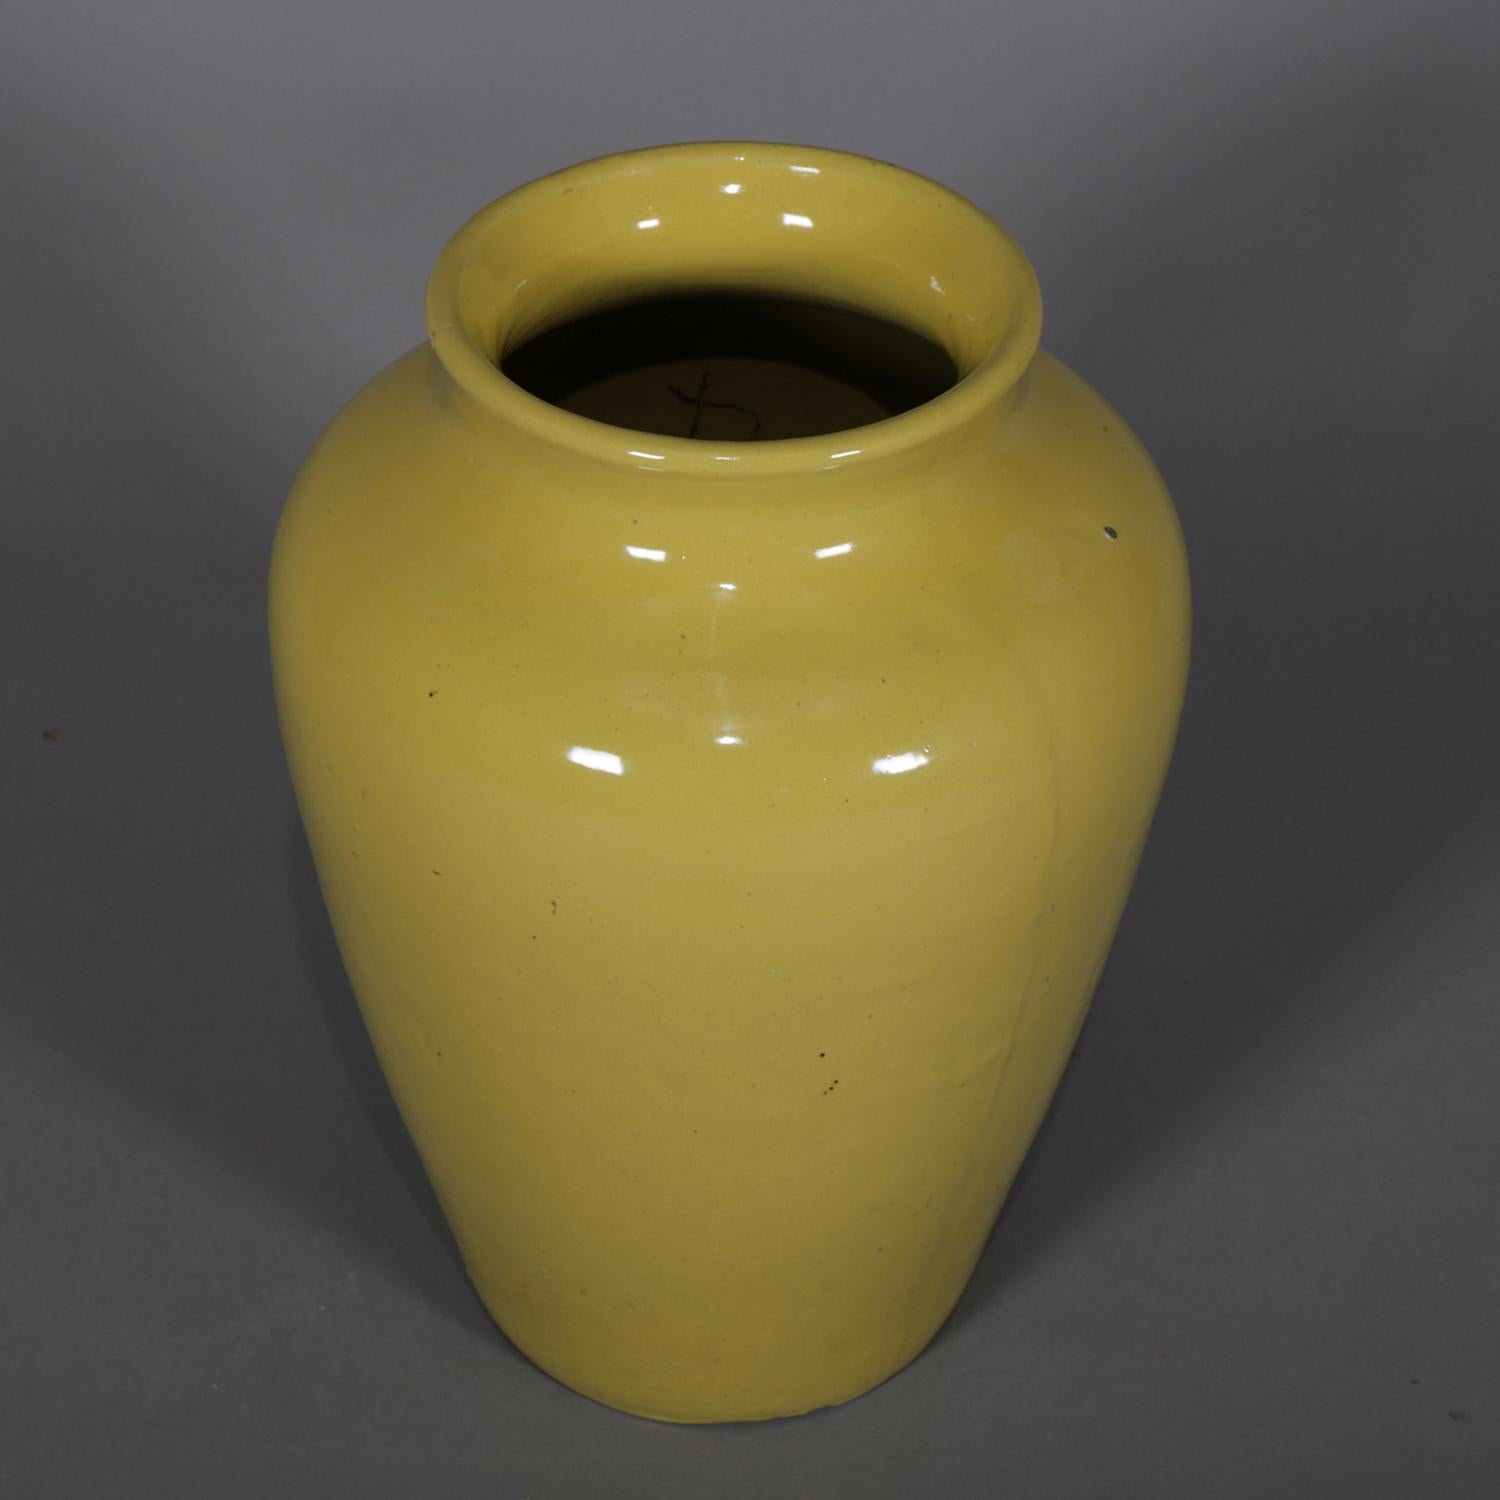 Vintage McCoy school art pottery floor vase features urn form with flared mouth and having yellow glazed exterior, 20th century.

Measures: 18